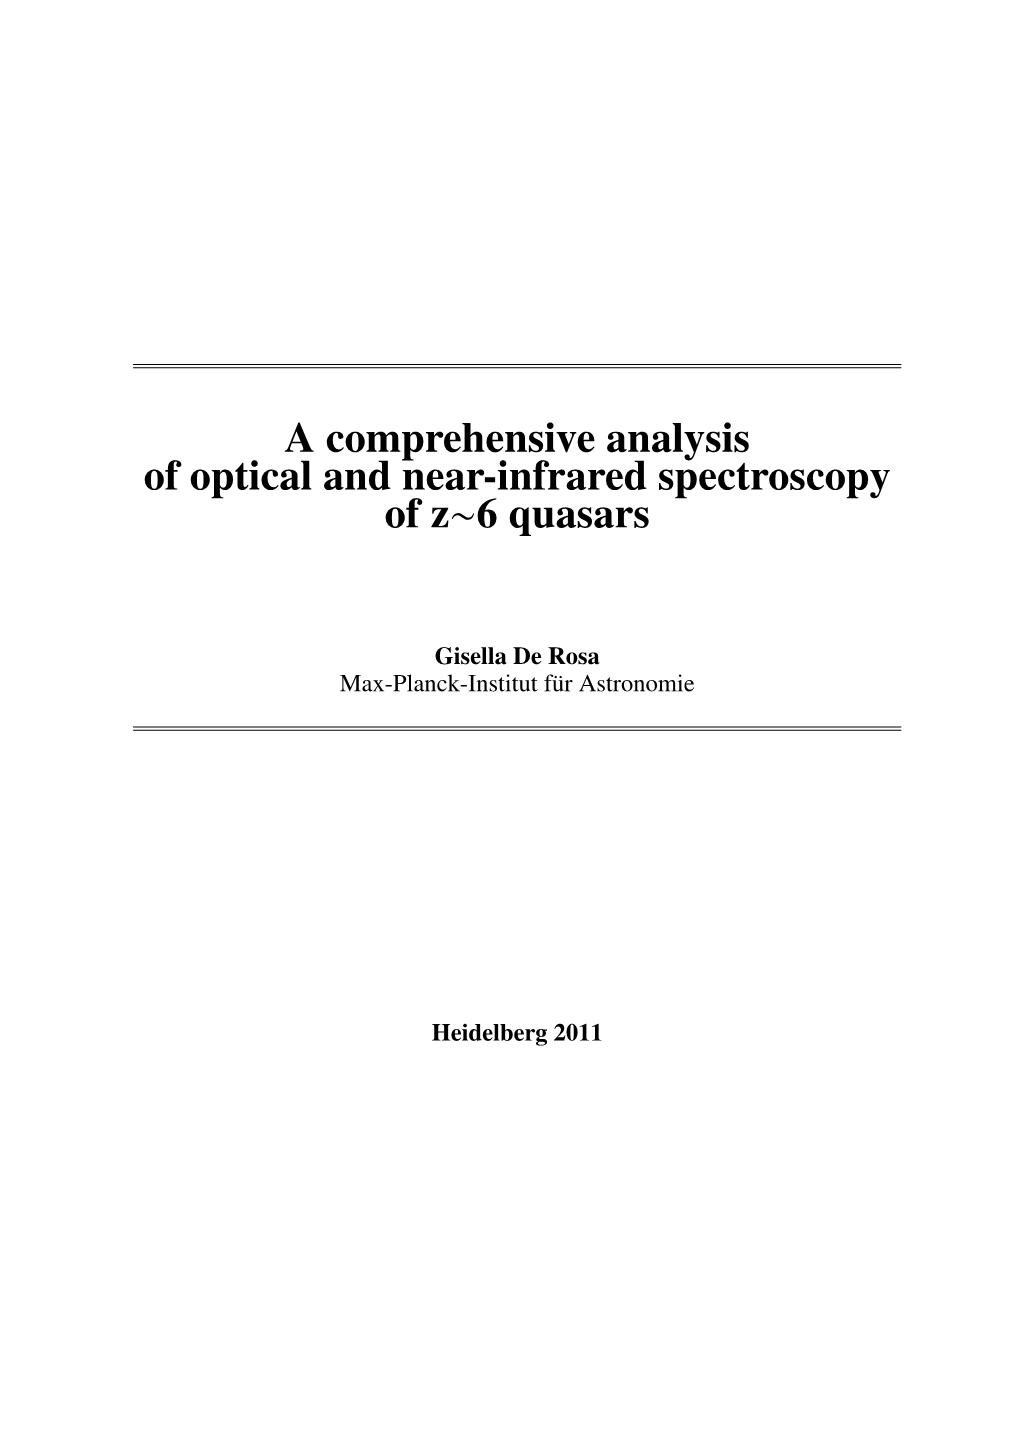 A Comprehensive Analysis of Optical and Near-Infrared Spectroscopy of Z∼6 Quasars